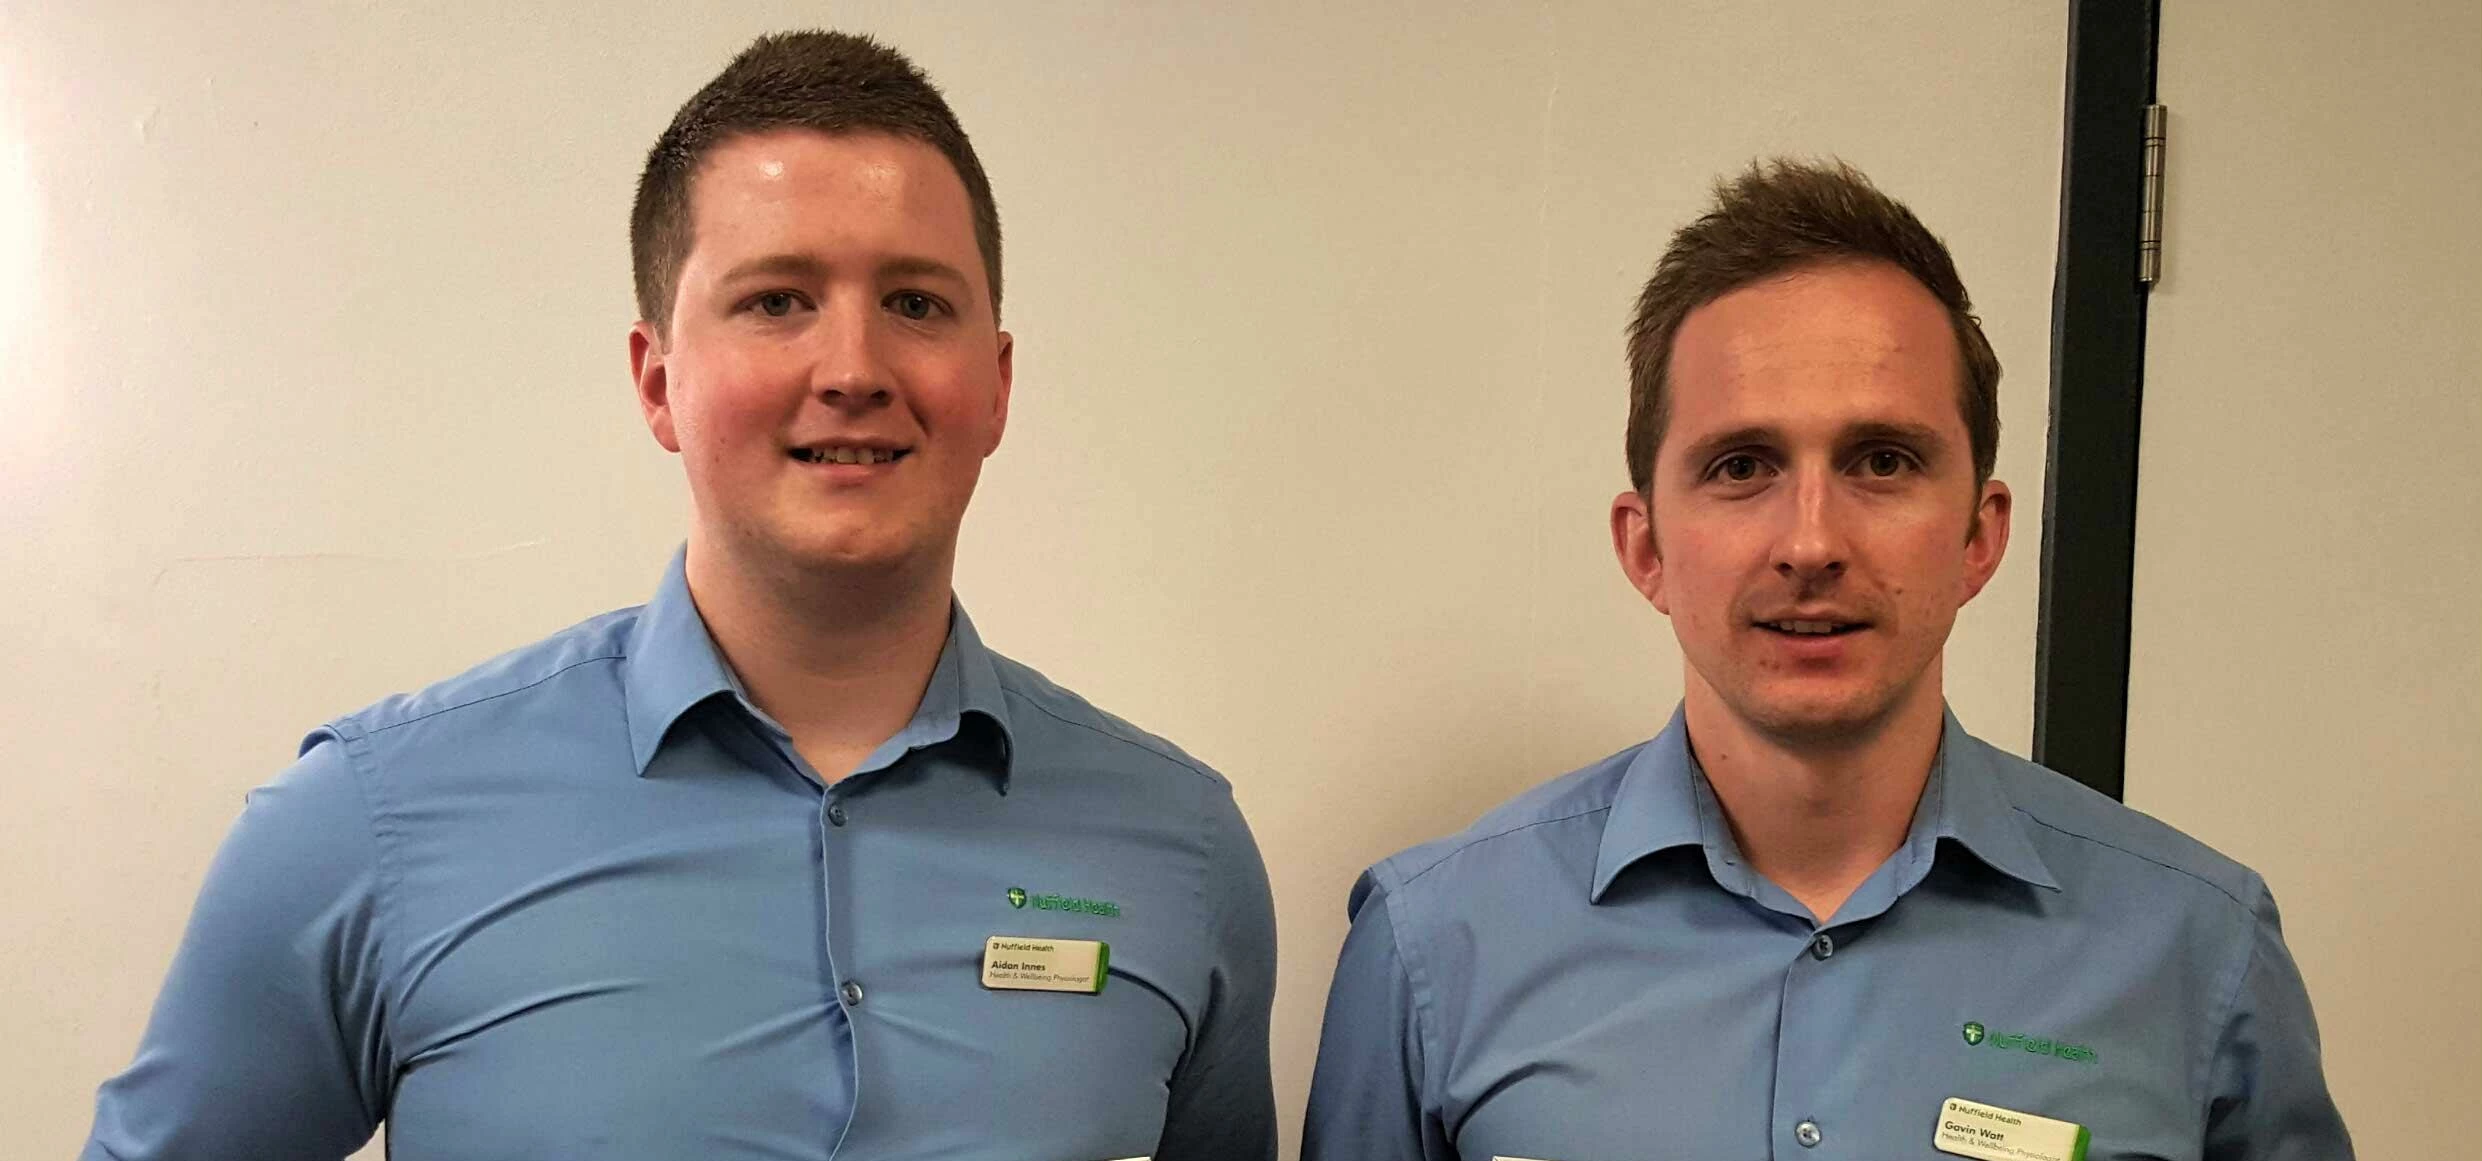 Pictured l-r is Aidan Innes and Gavin Watt, health and wellbeing physiologists at Nuffield Health Ne